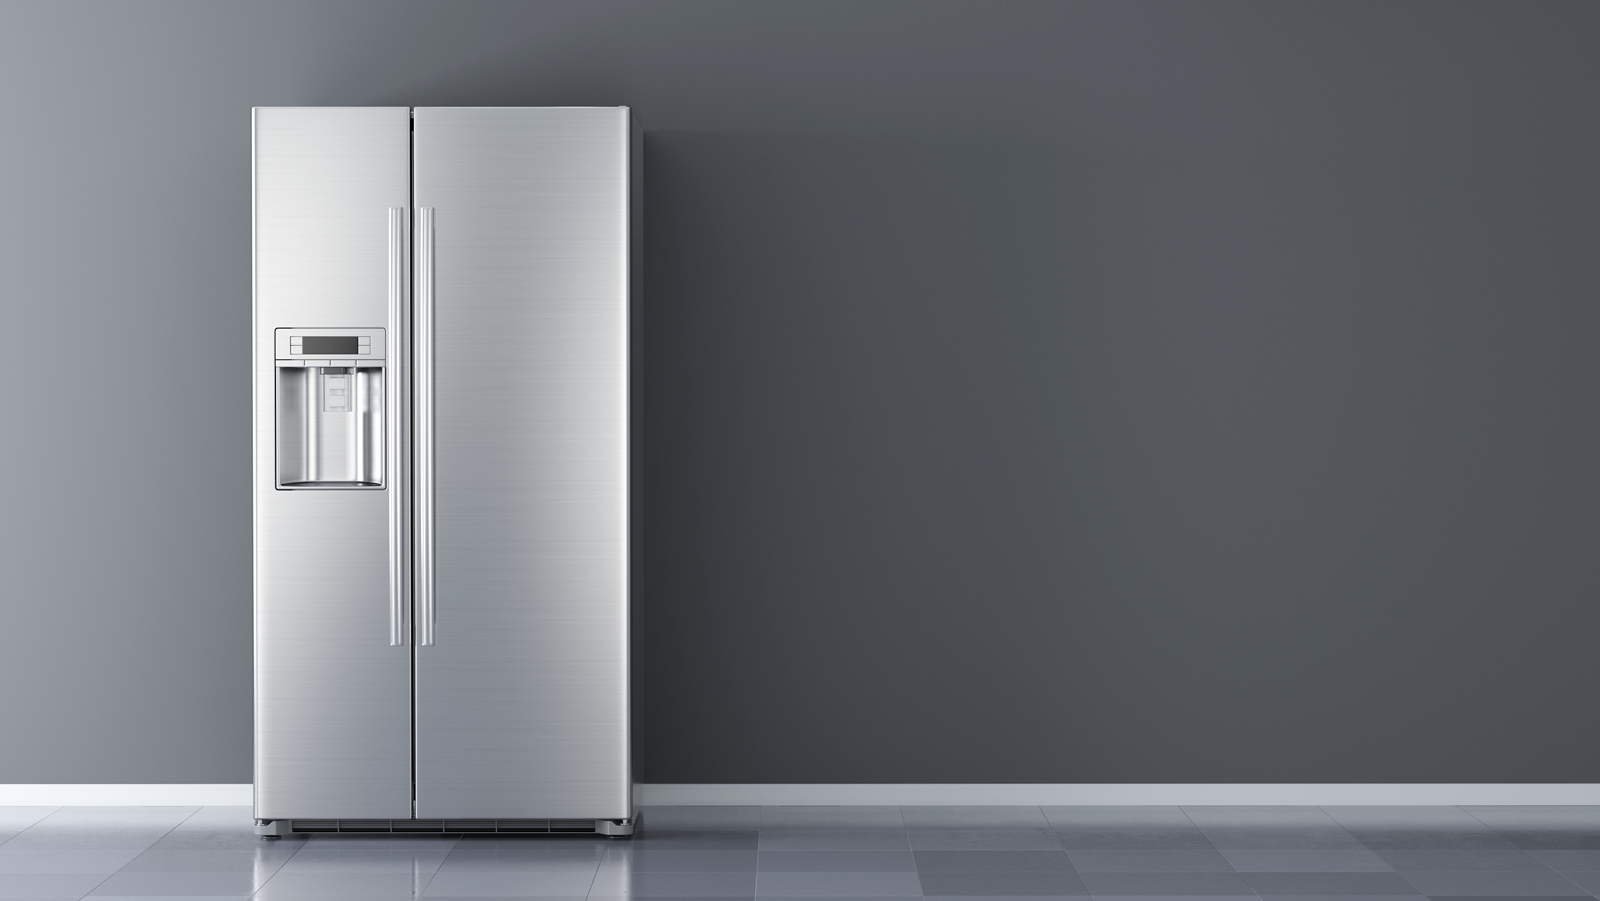 Stainless Steel Refrigerator — Electricians And Appliance Repair Experts In Mackay, QLD